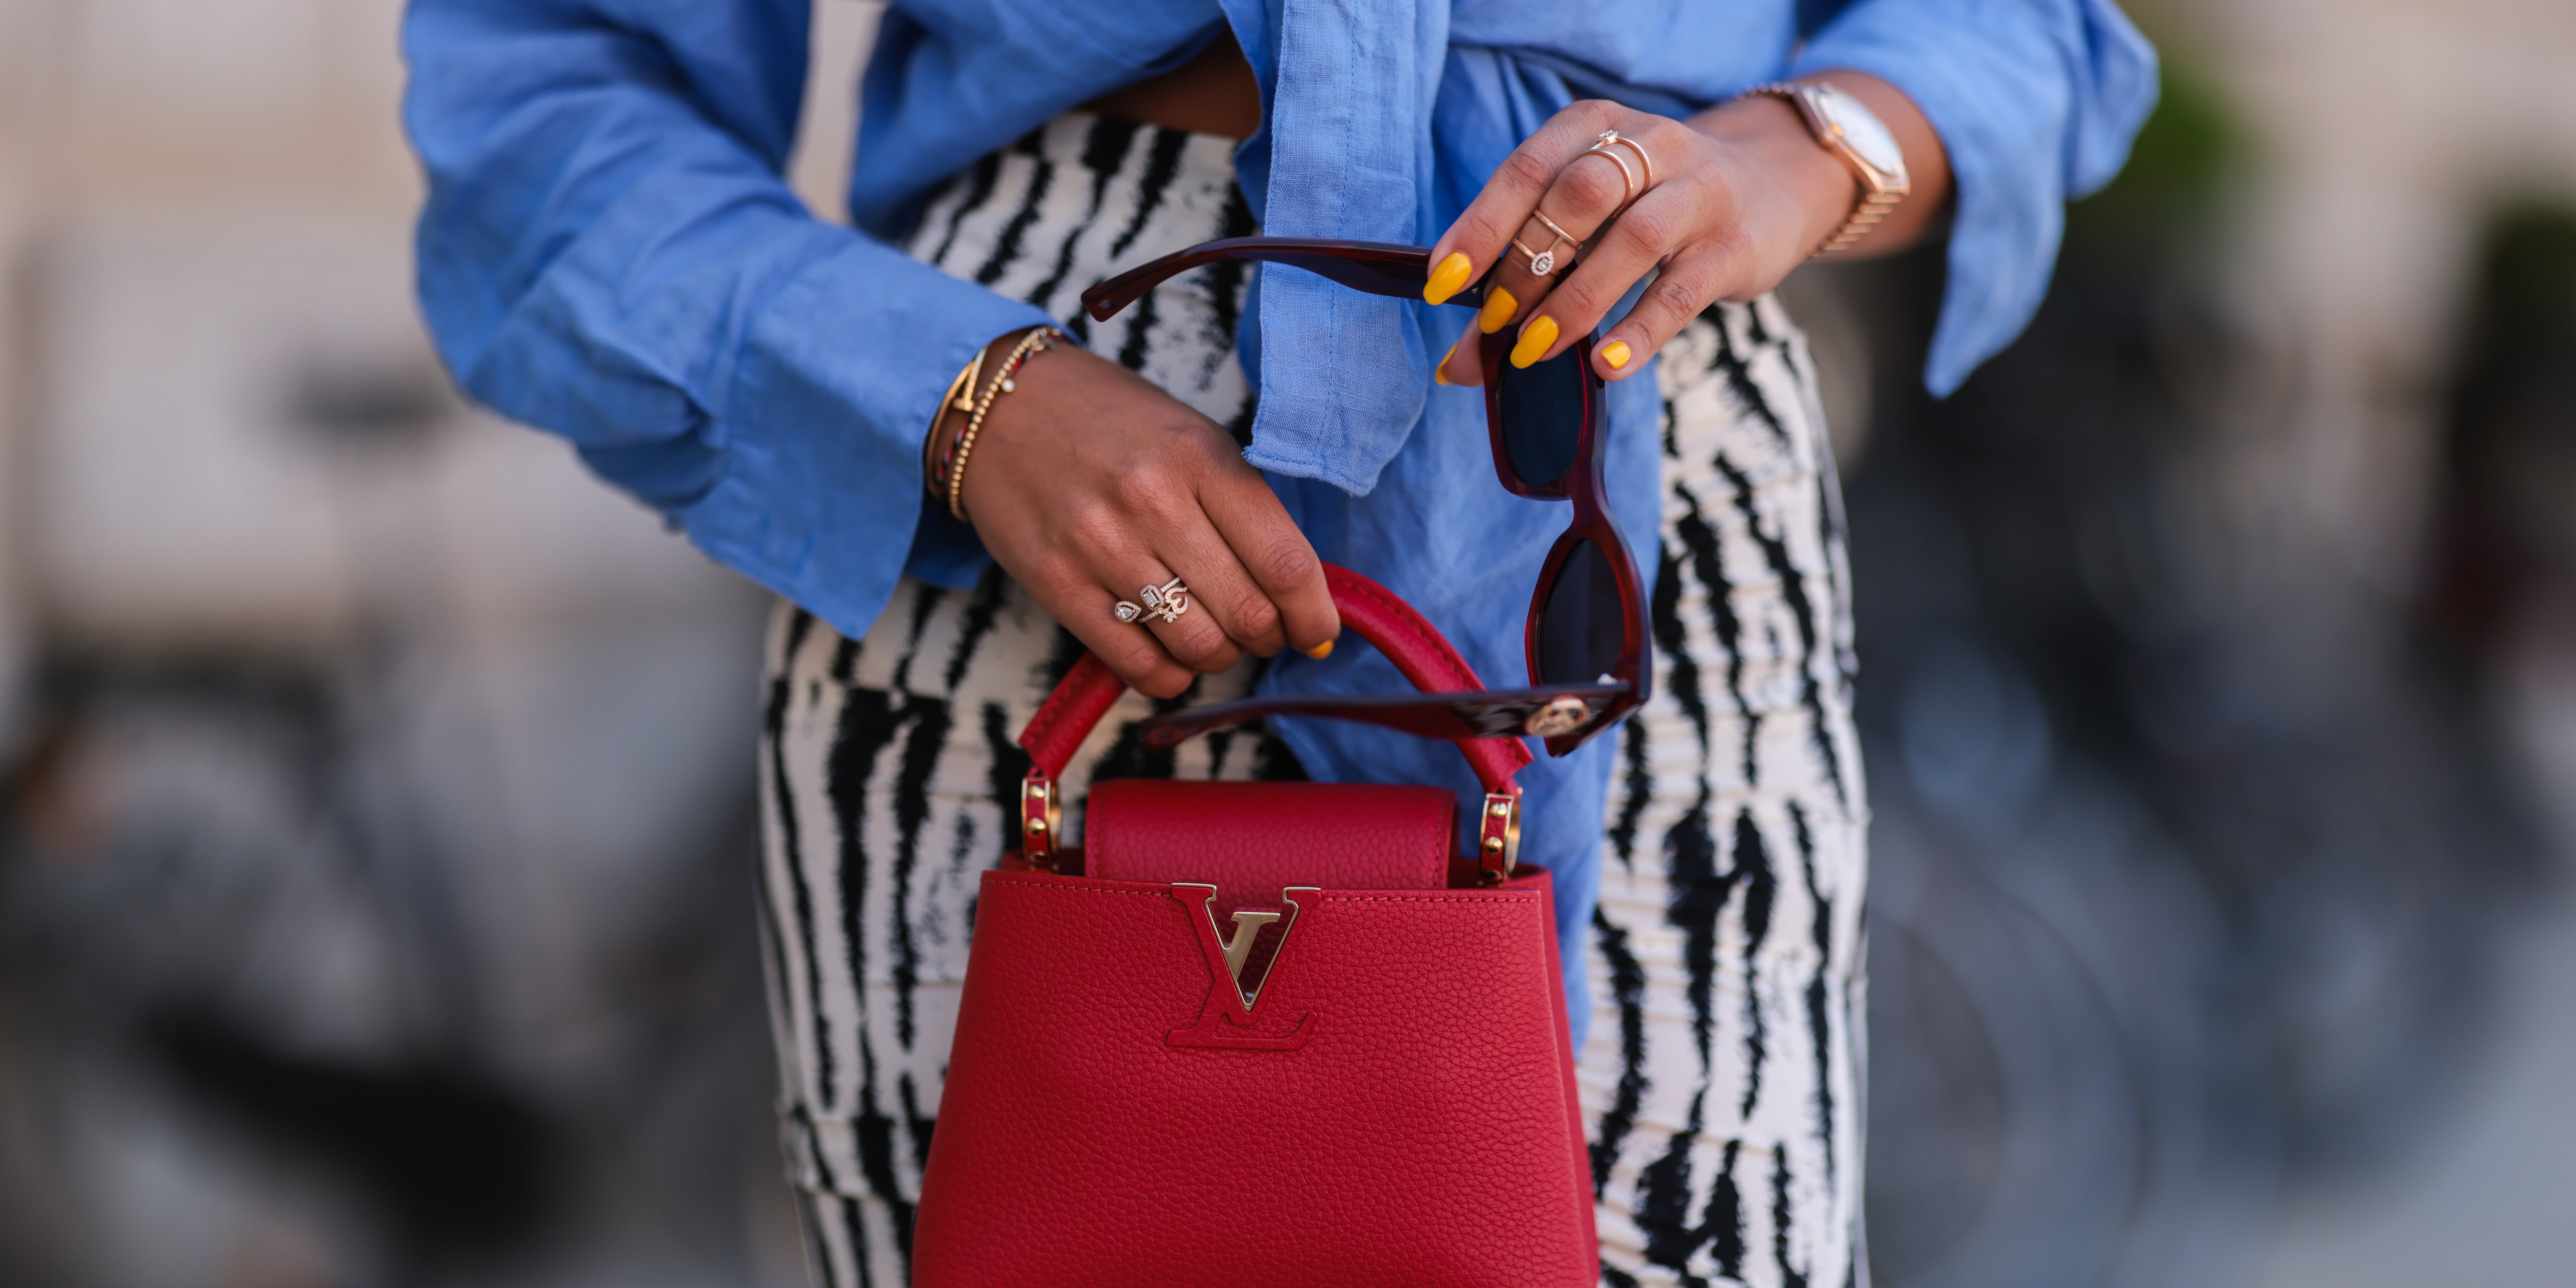 8 Summer Handbag Trends That Have Street Style's Stamp of Approval